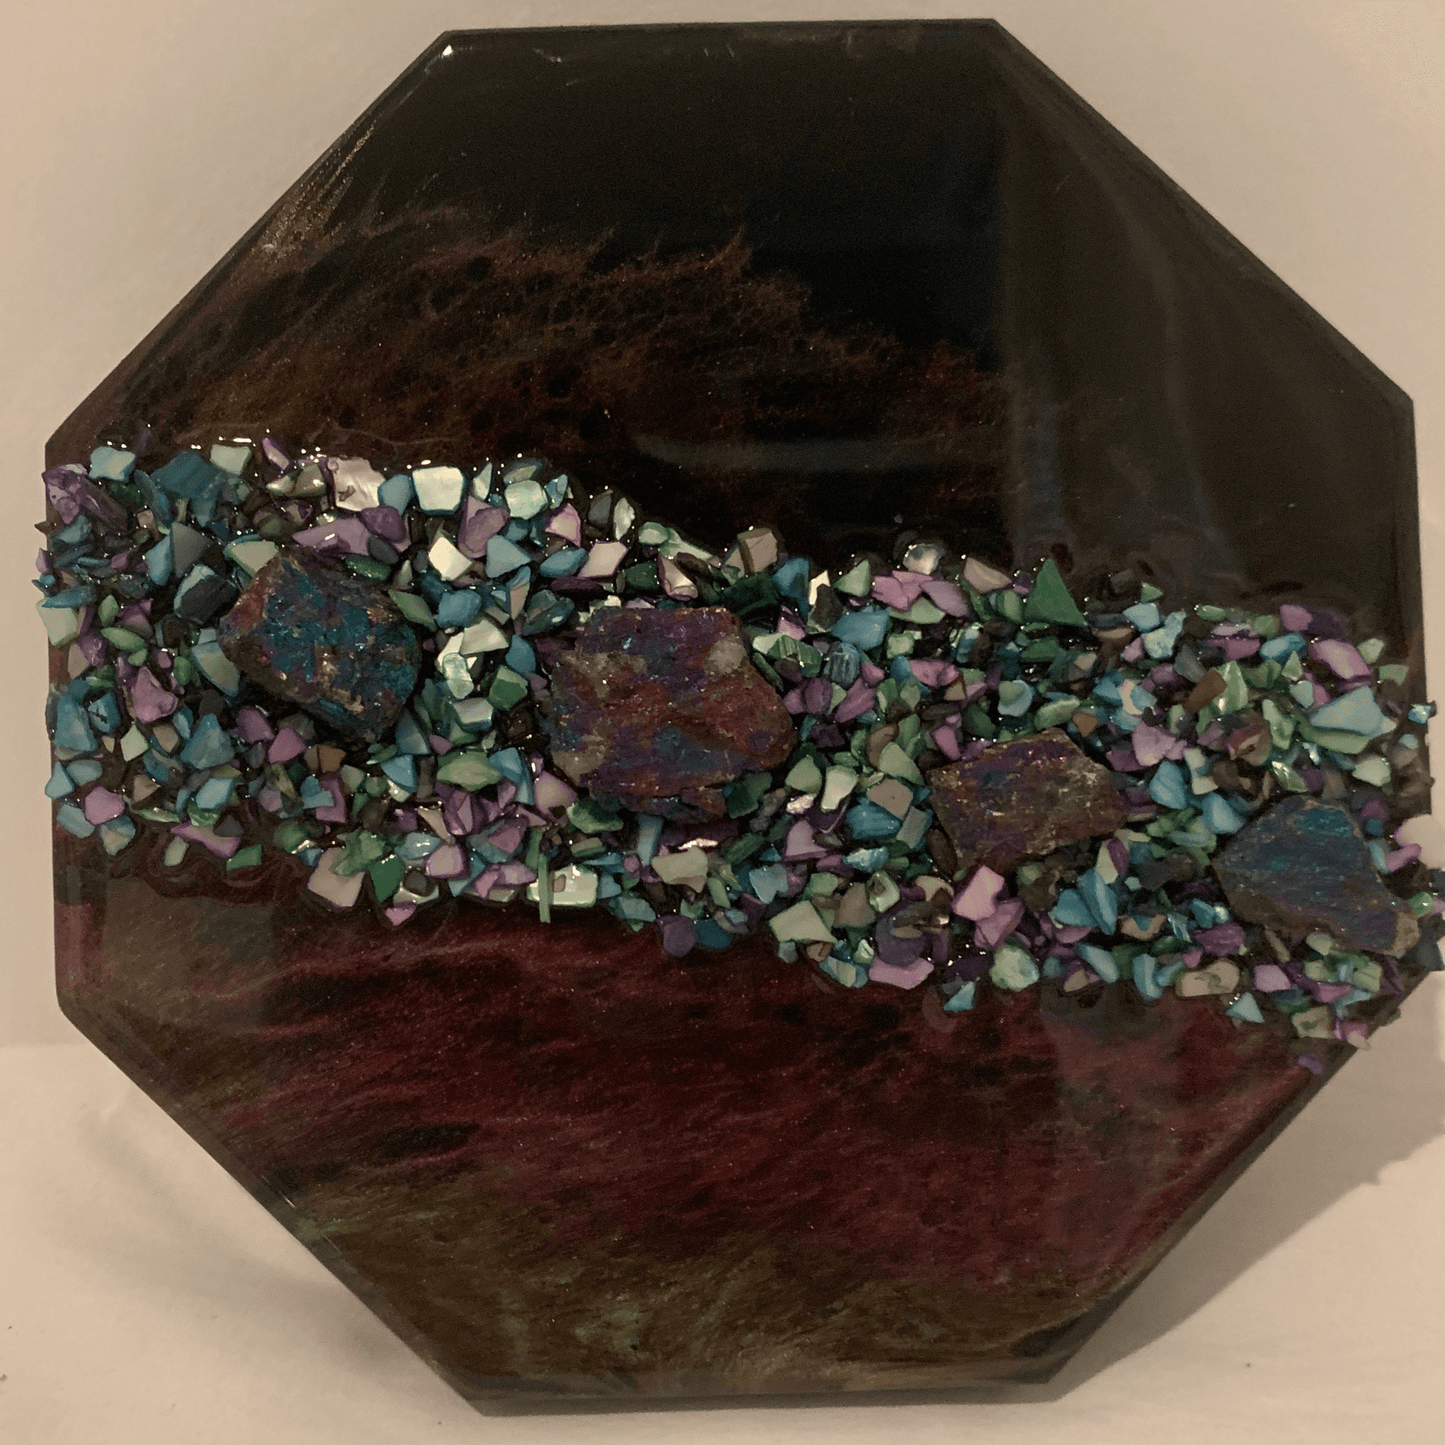 "GIVE ME SPACE" Modern Resin Art With Chalcopyrite (Peacock Ore) Crystals & Abalone Shells